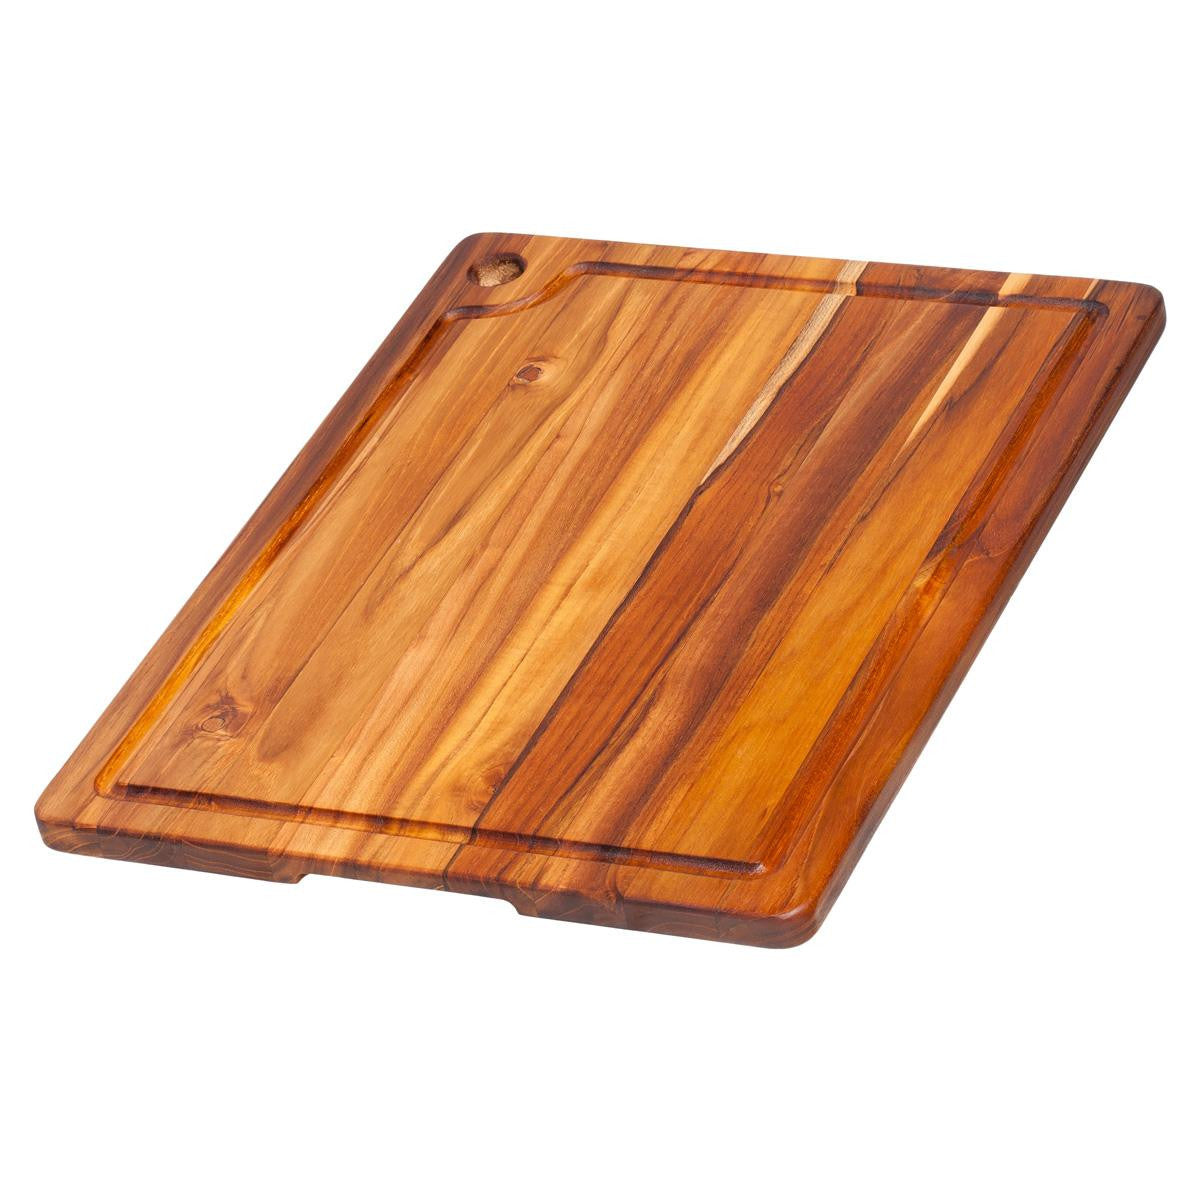 Teak Haus Carving Board with Juice Groove